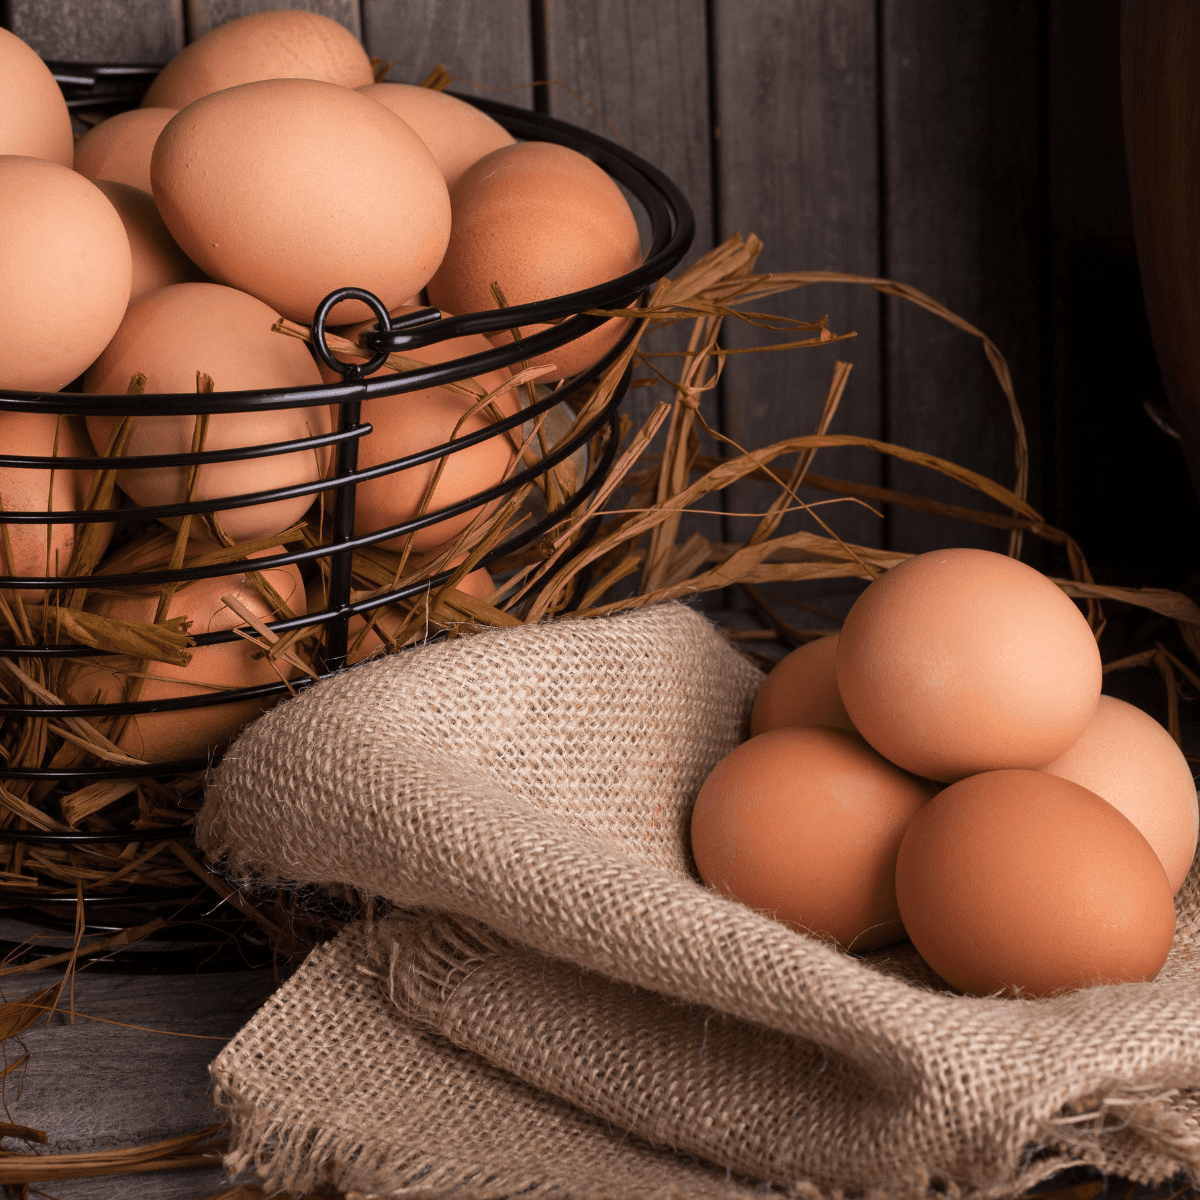 Eggs in basket and sitting on burlap